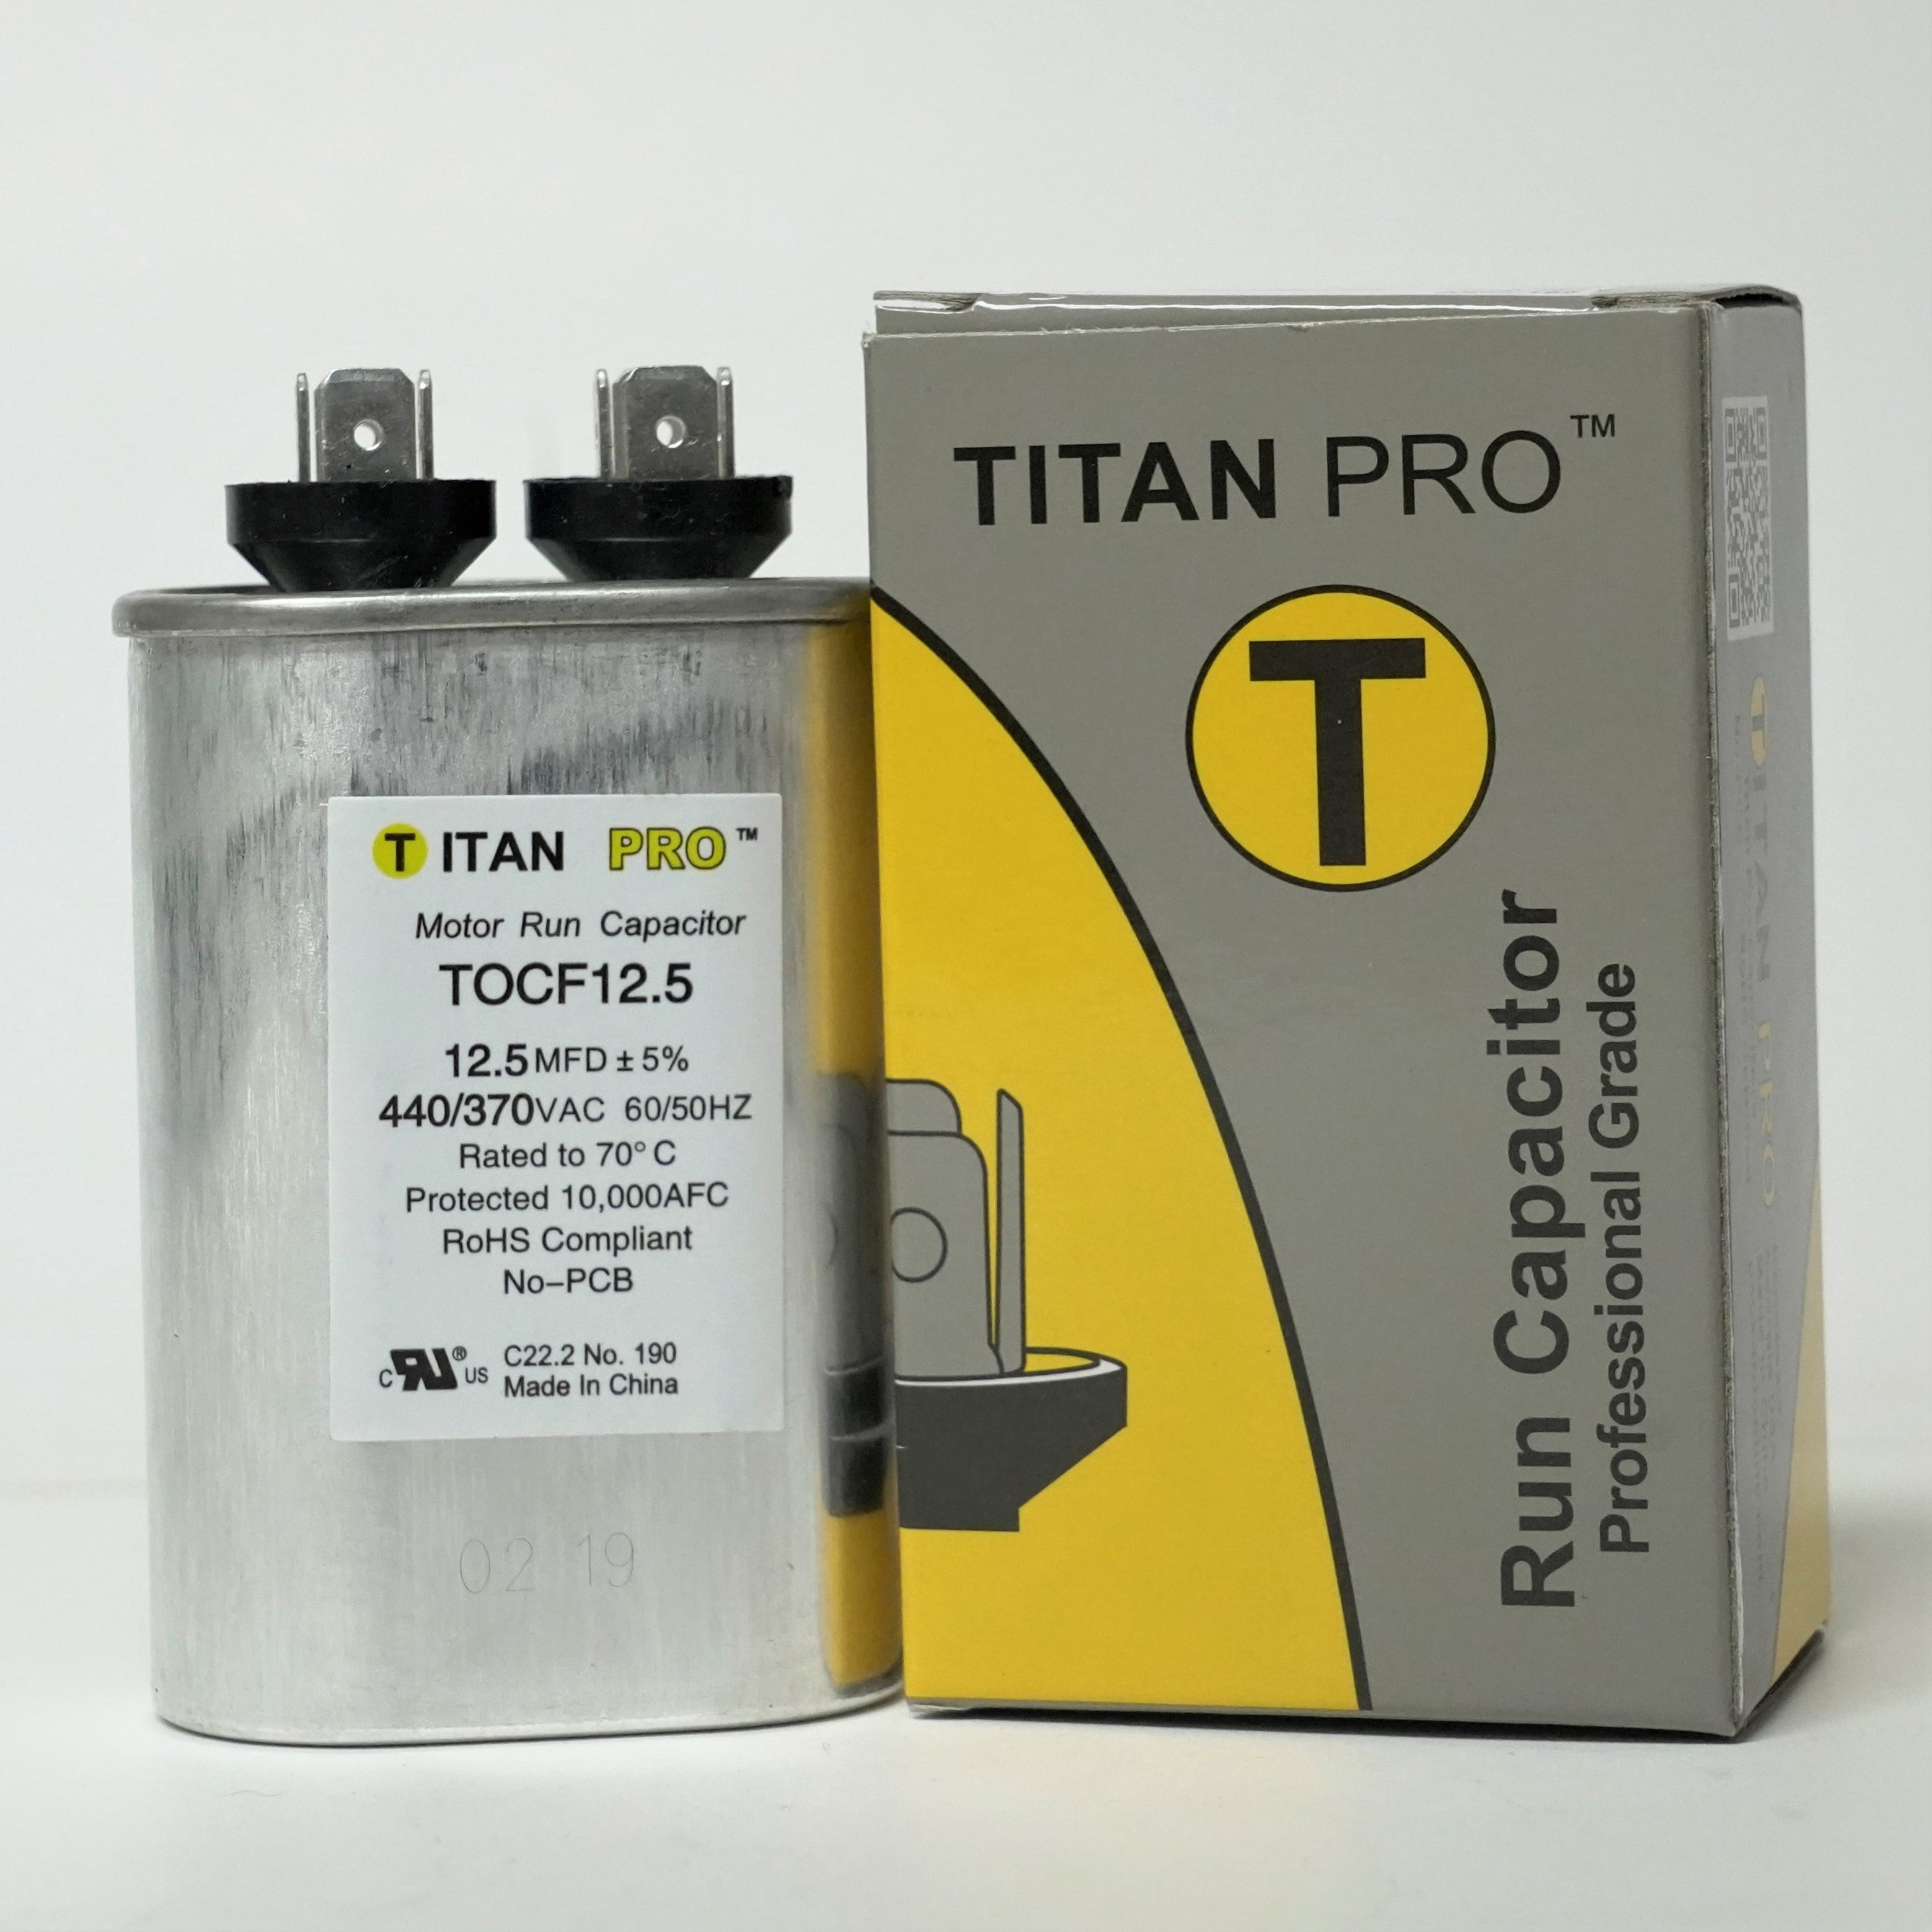 370 VAC Oval Motor Run Capacitor Toc12.5 HVAC TITAN Pro for sale online Packard 12.5 MFD 